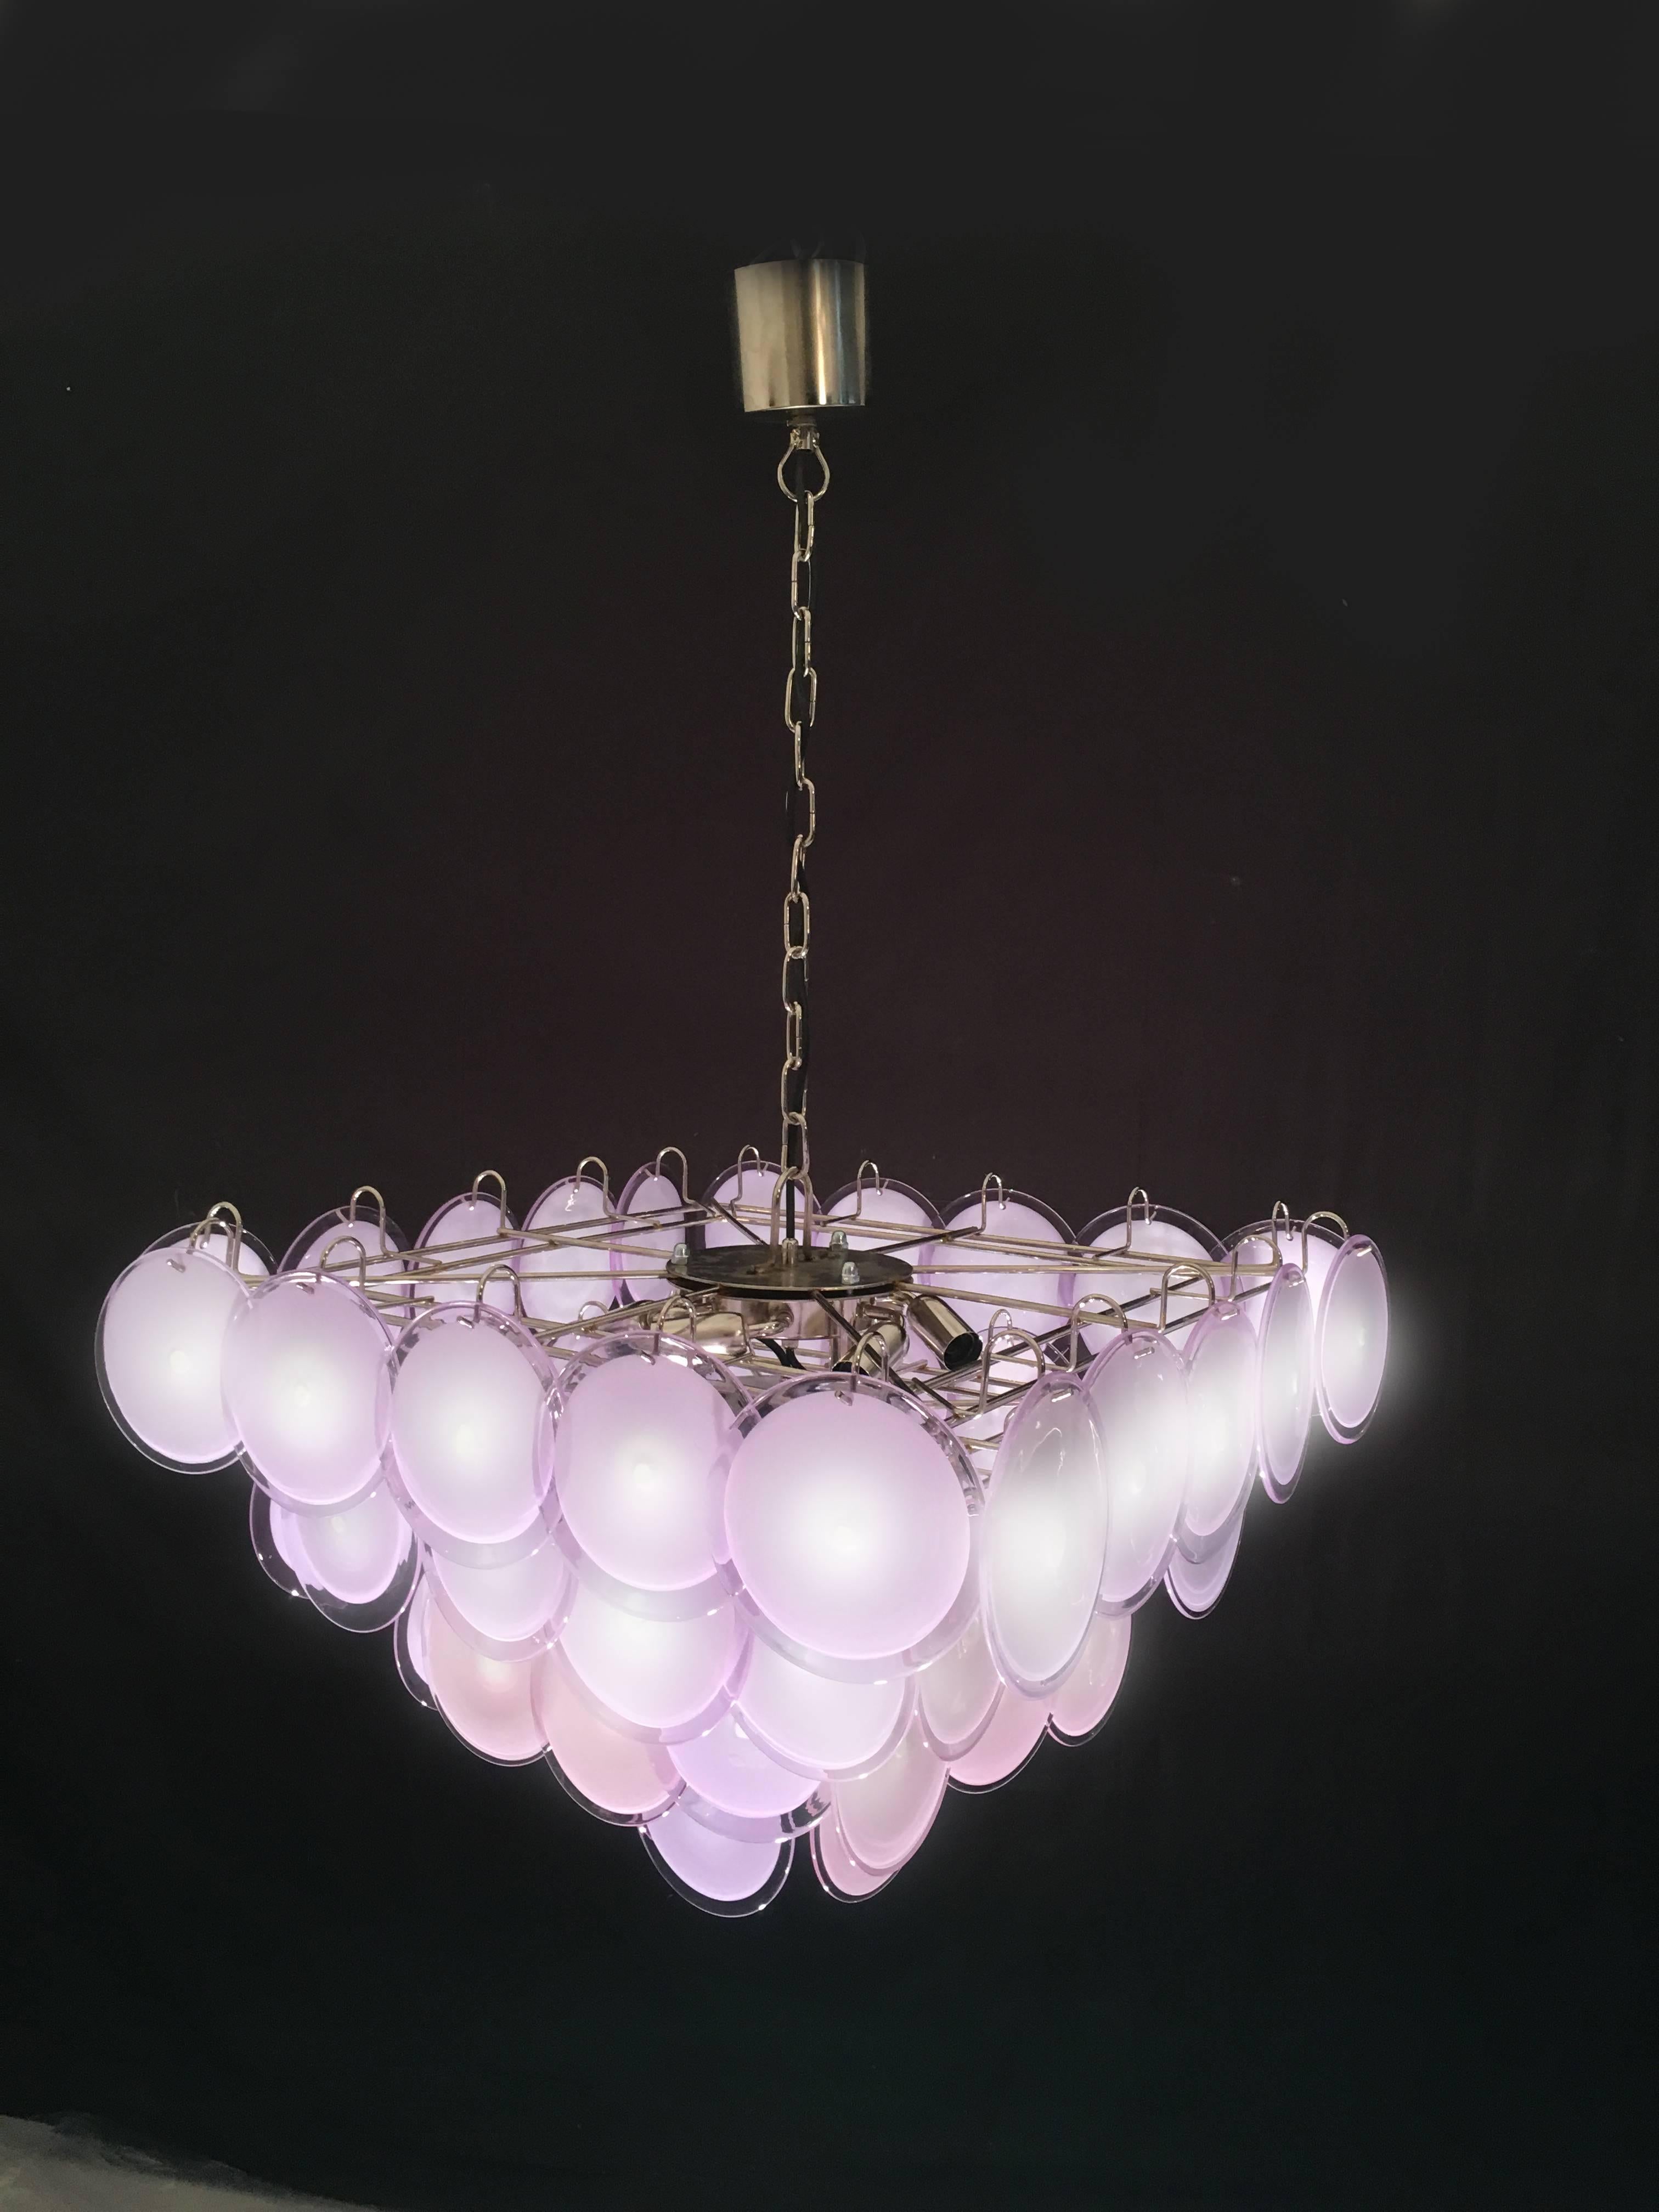 The chandelier is made of 52 discs of precious pink or amethyst Murano glass are arranged on four levels.
Nine E14 lights.
Available four chandeliers.